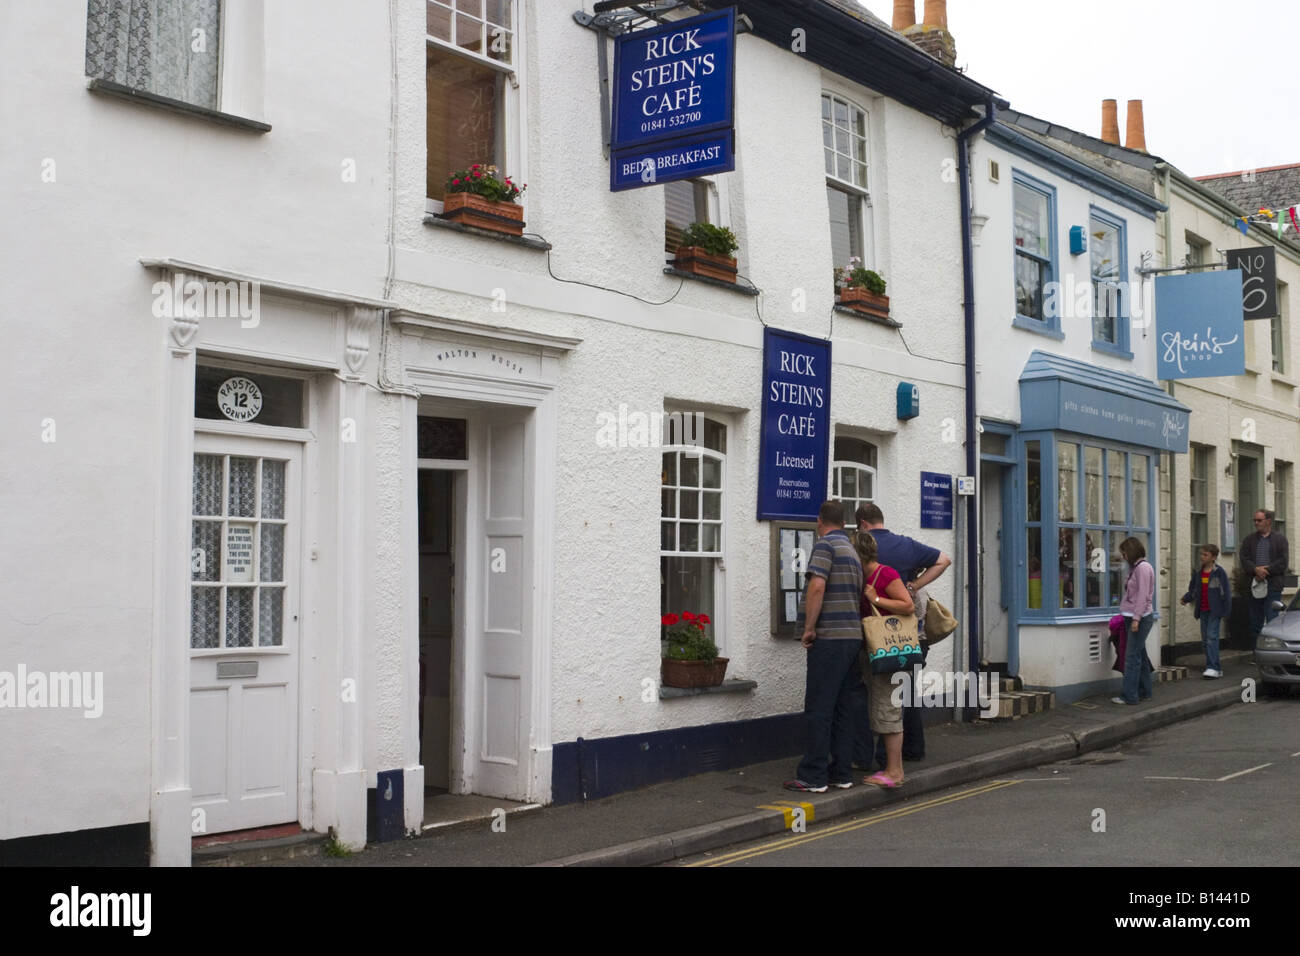 Rick Stein's Cafe Padstow Cornwall South West England United Kingdom Stock Photo